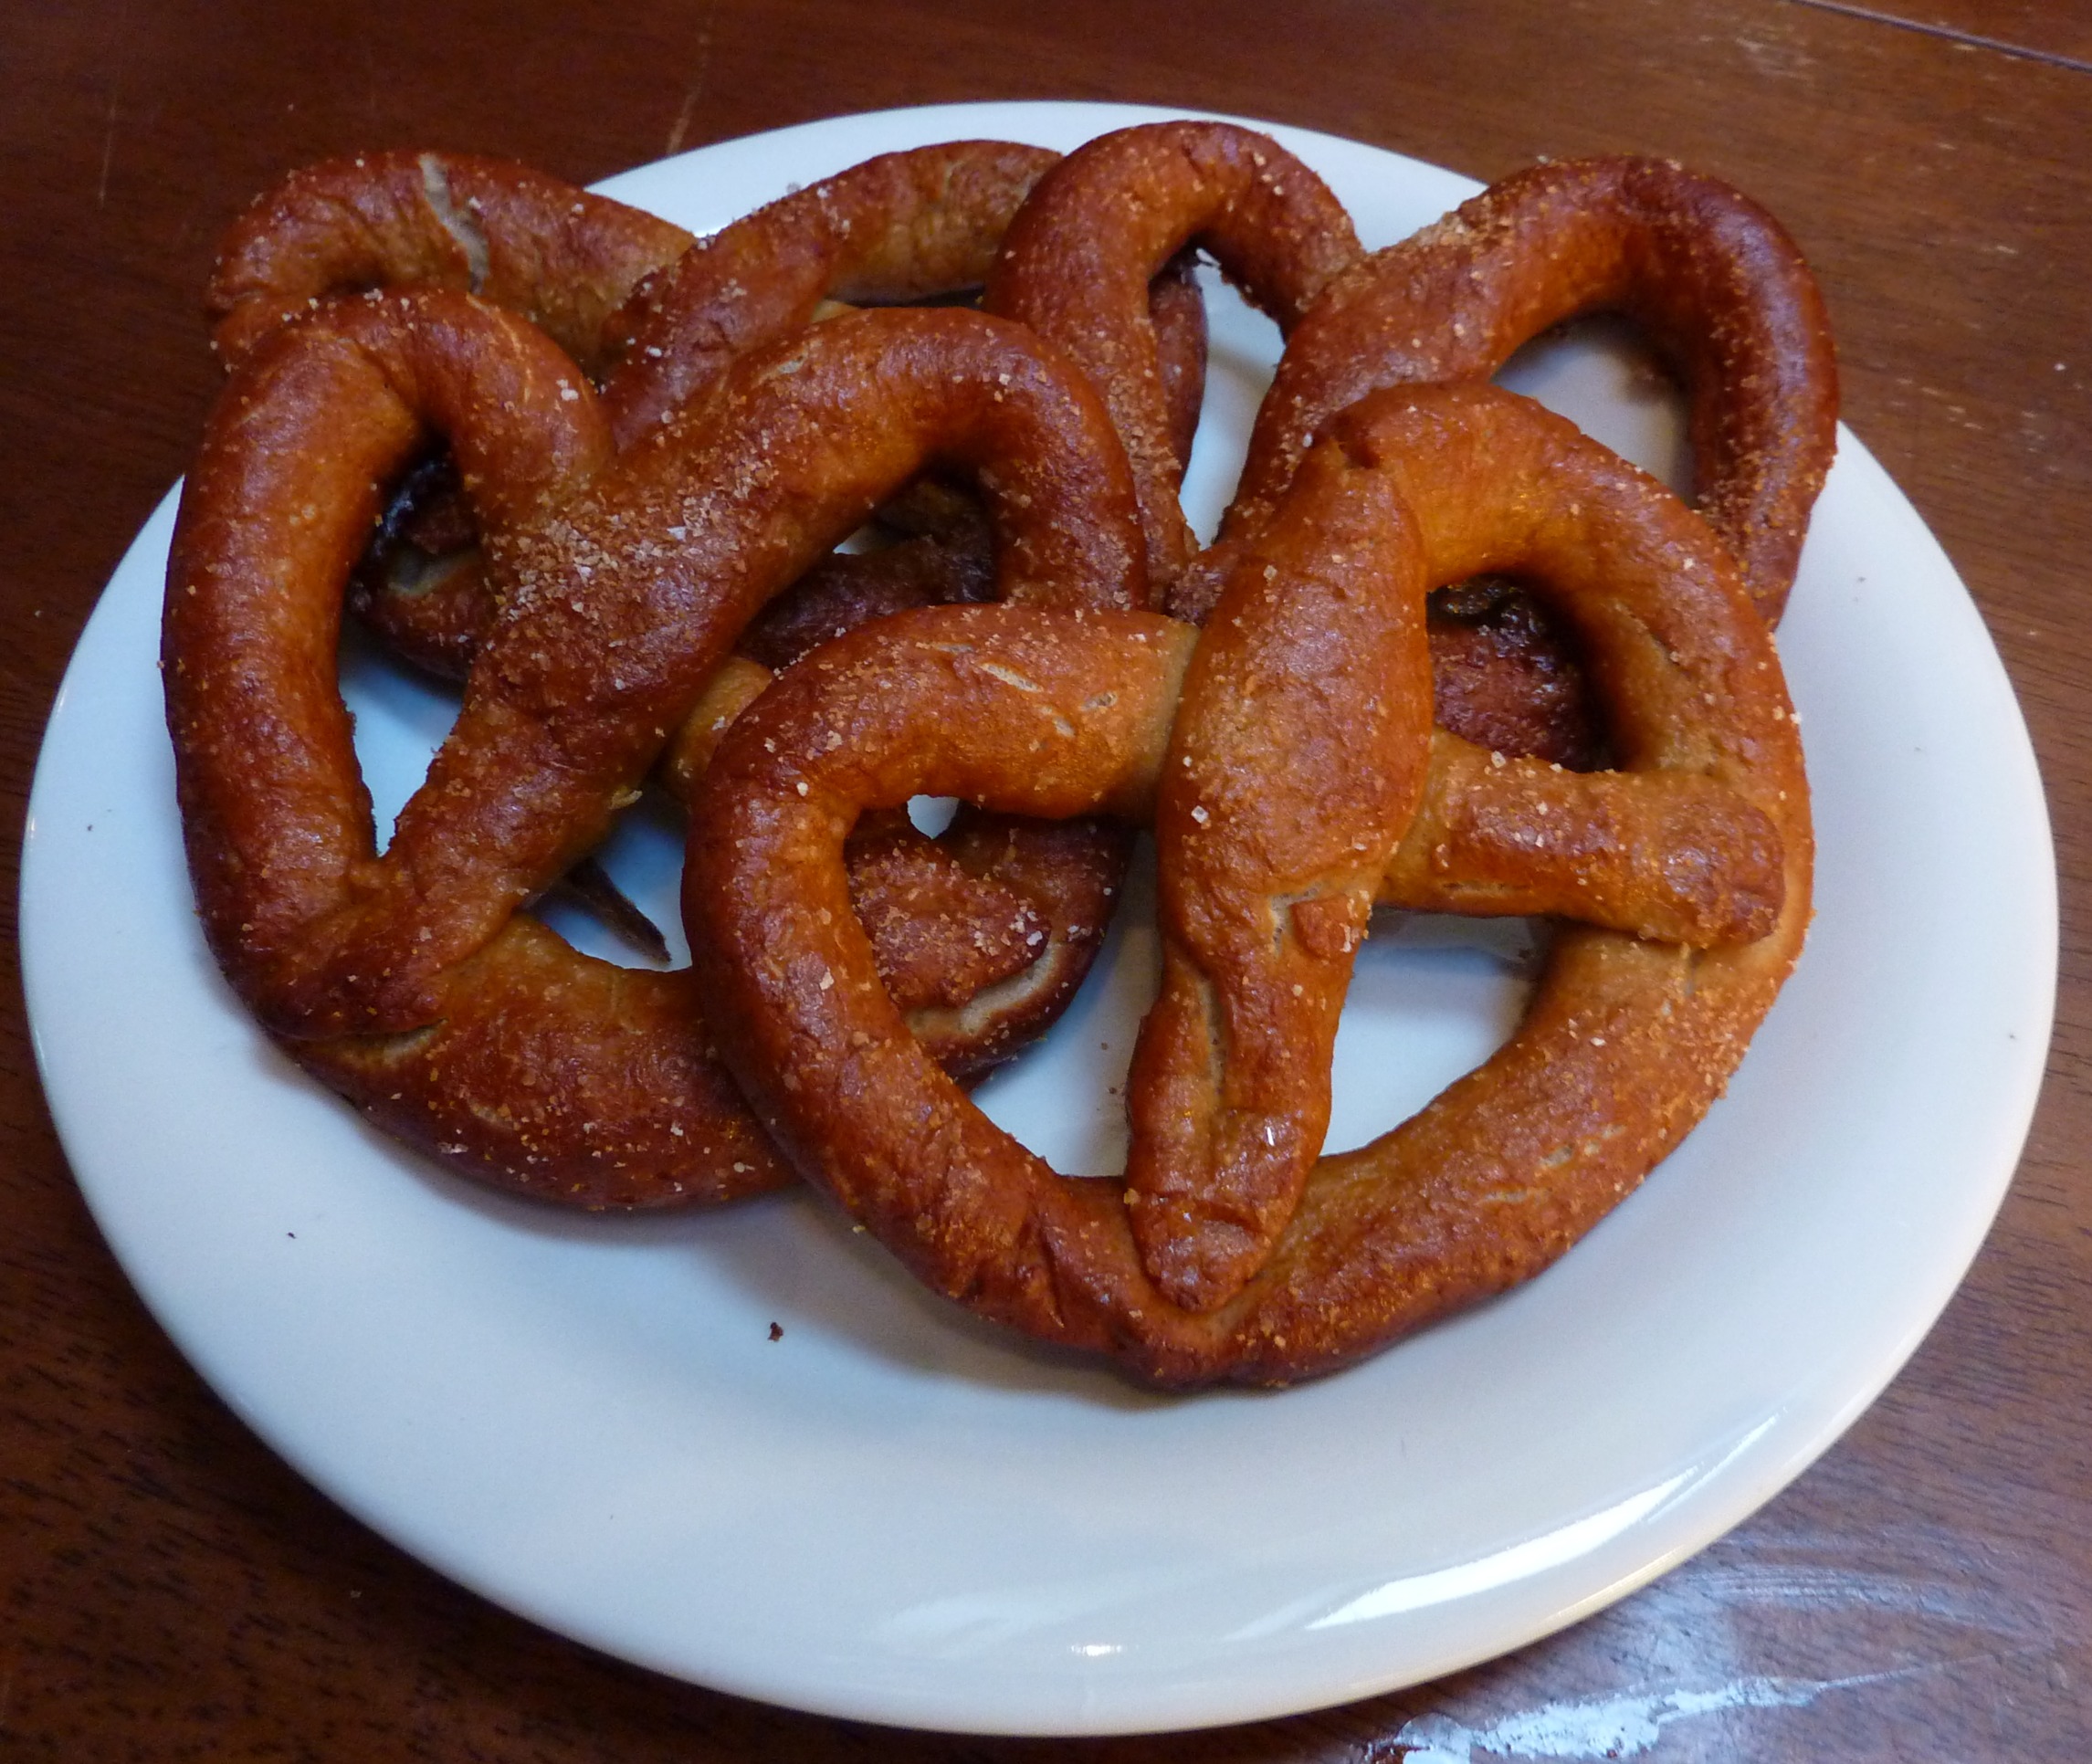 Be Free For Me Blog Blog Archive A Soft Gluten Free Pretzel Recipe That s A Winner Watch 